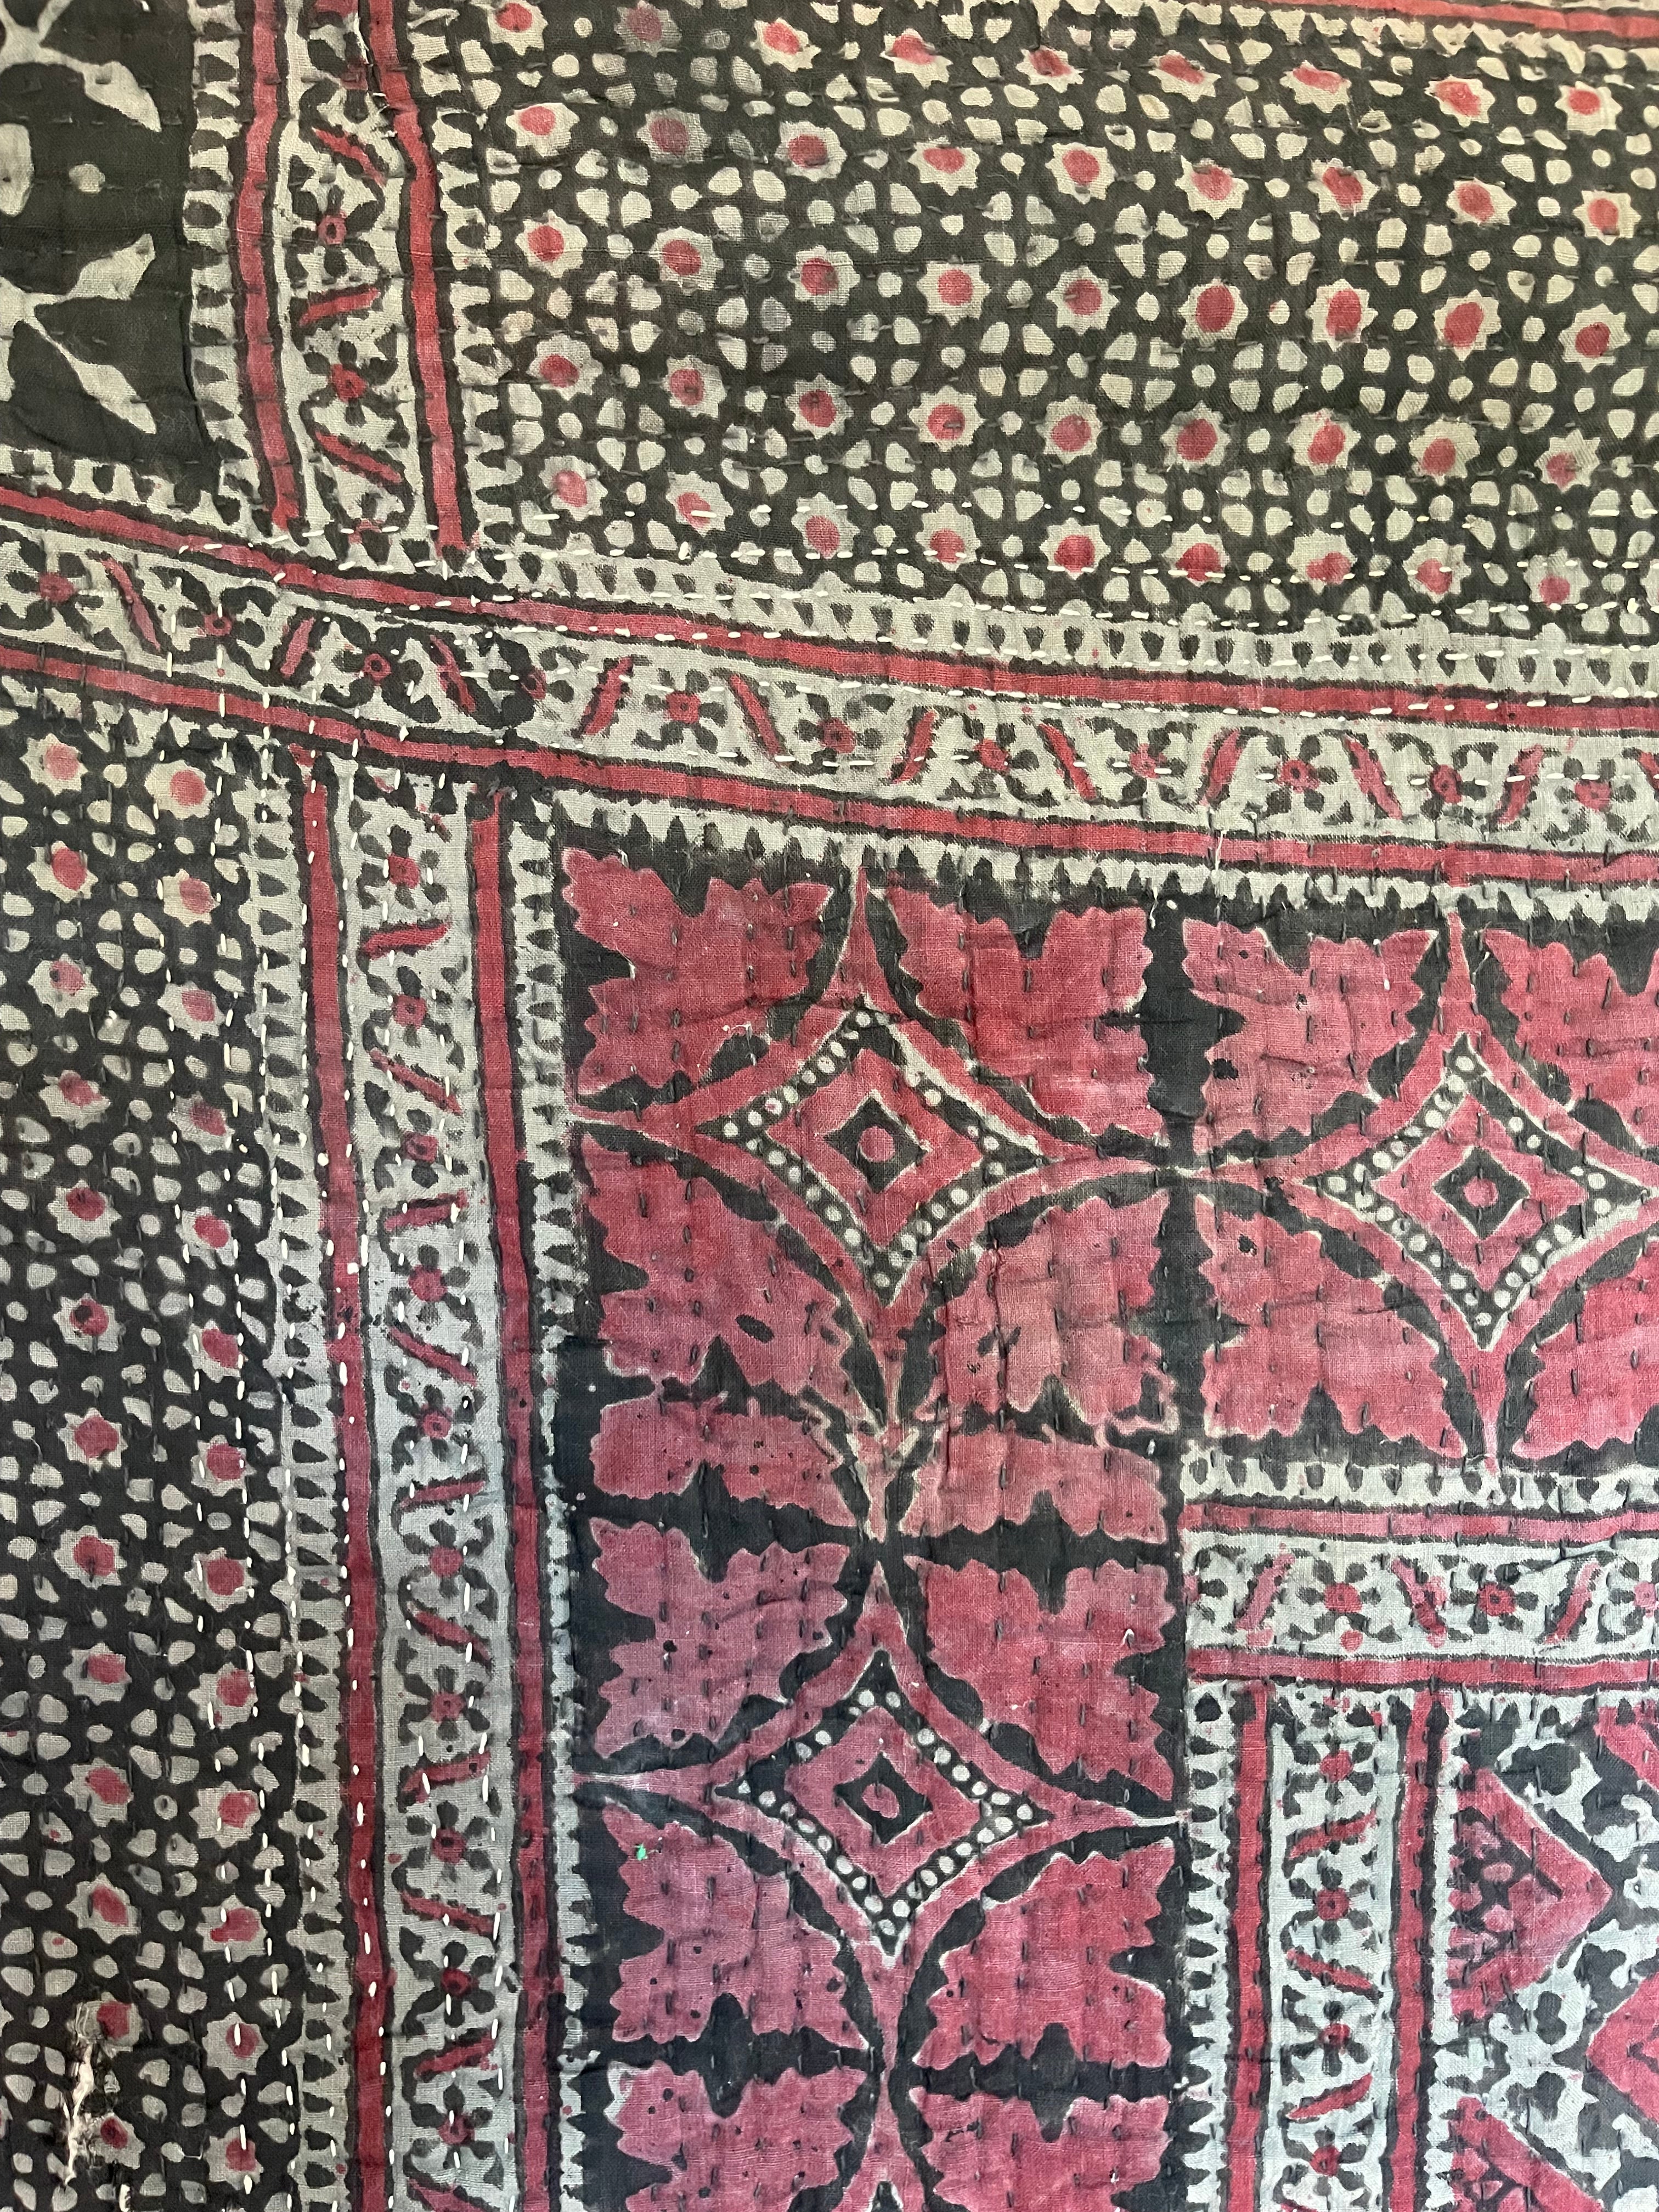 This ralli illustrates one of the most typical everyday quilts. The color scheme is based on the old, natural dyes colors even though chemical dyes are now used. The size of the fabric used in the piecing is typical for an everyday quilt. The geometric design is bold, especially when viewed from a distance.